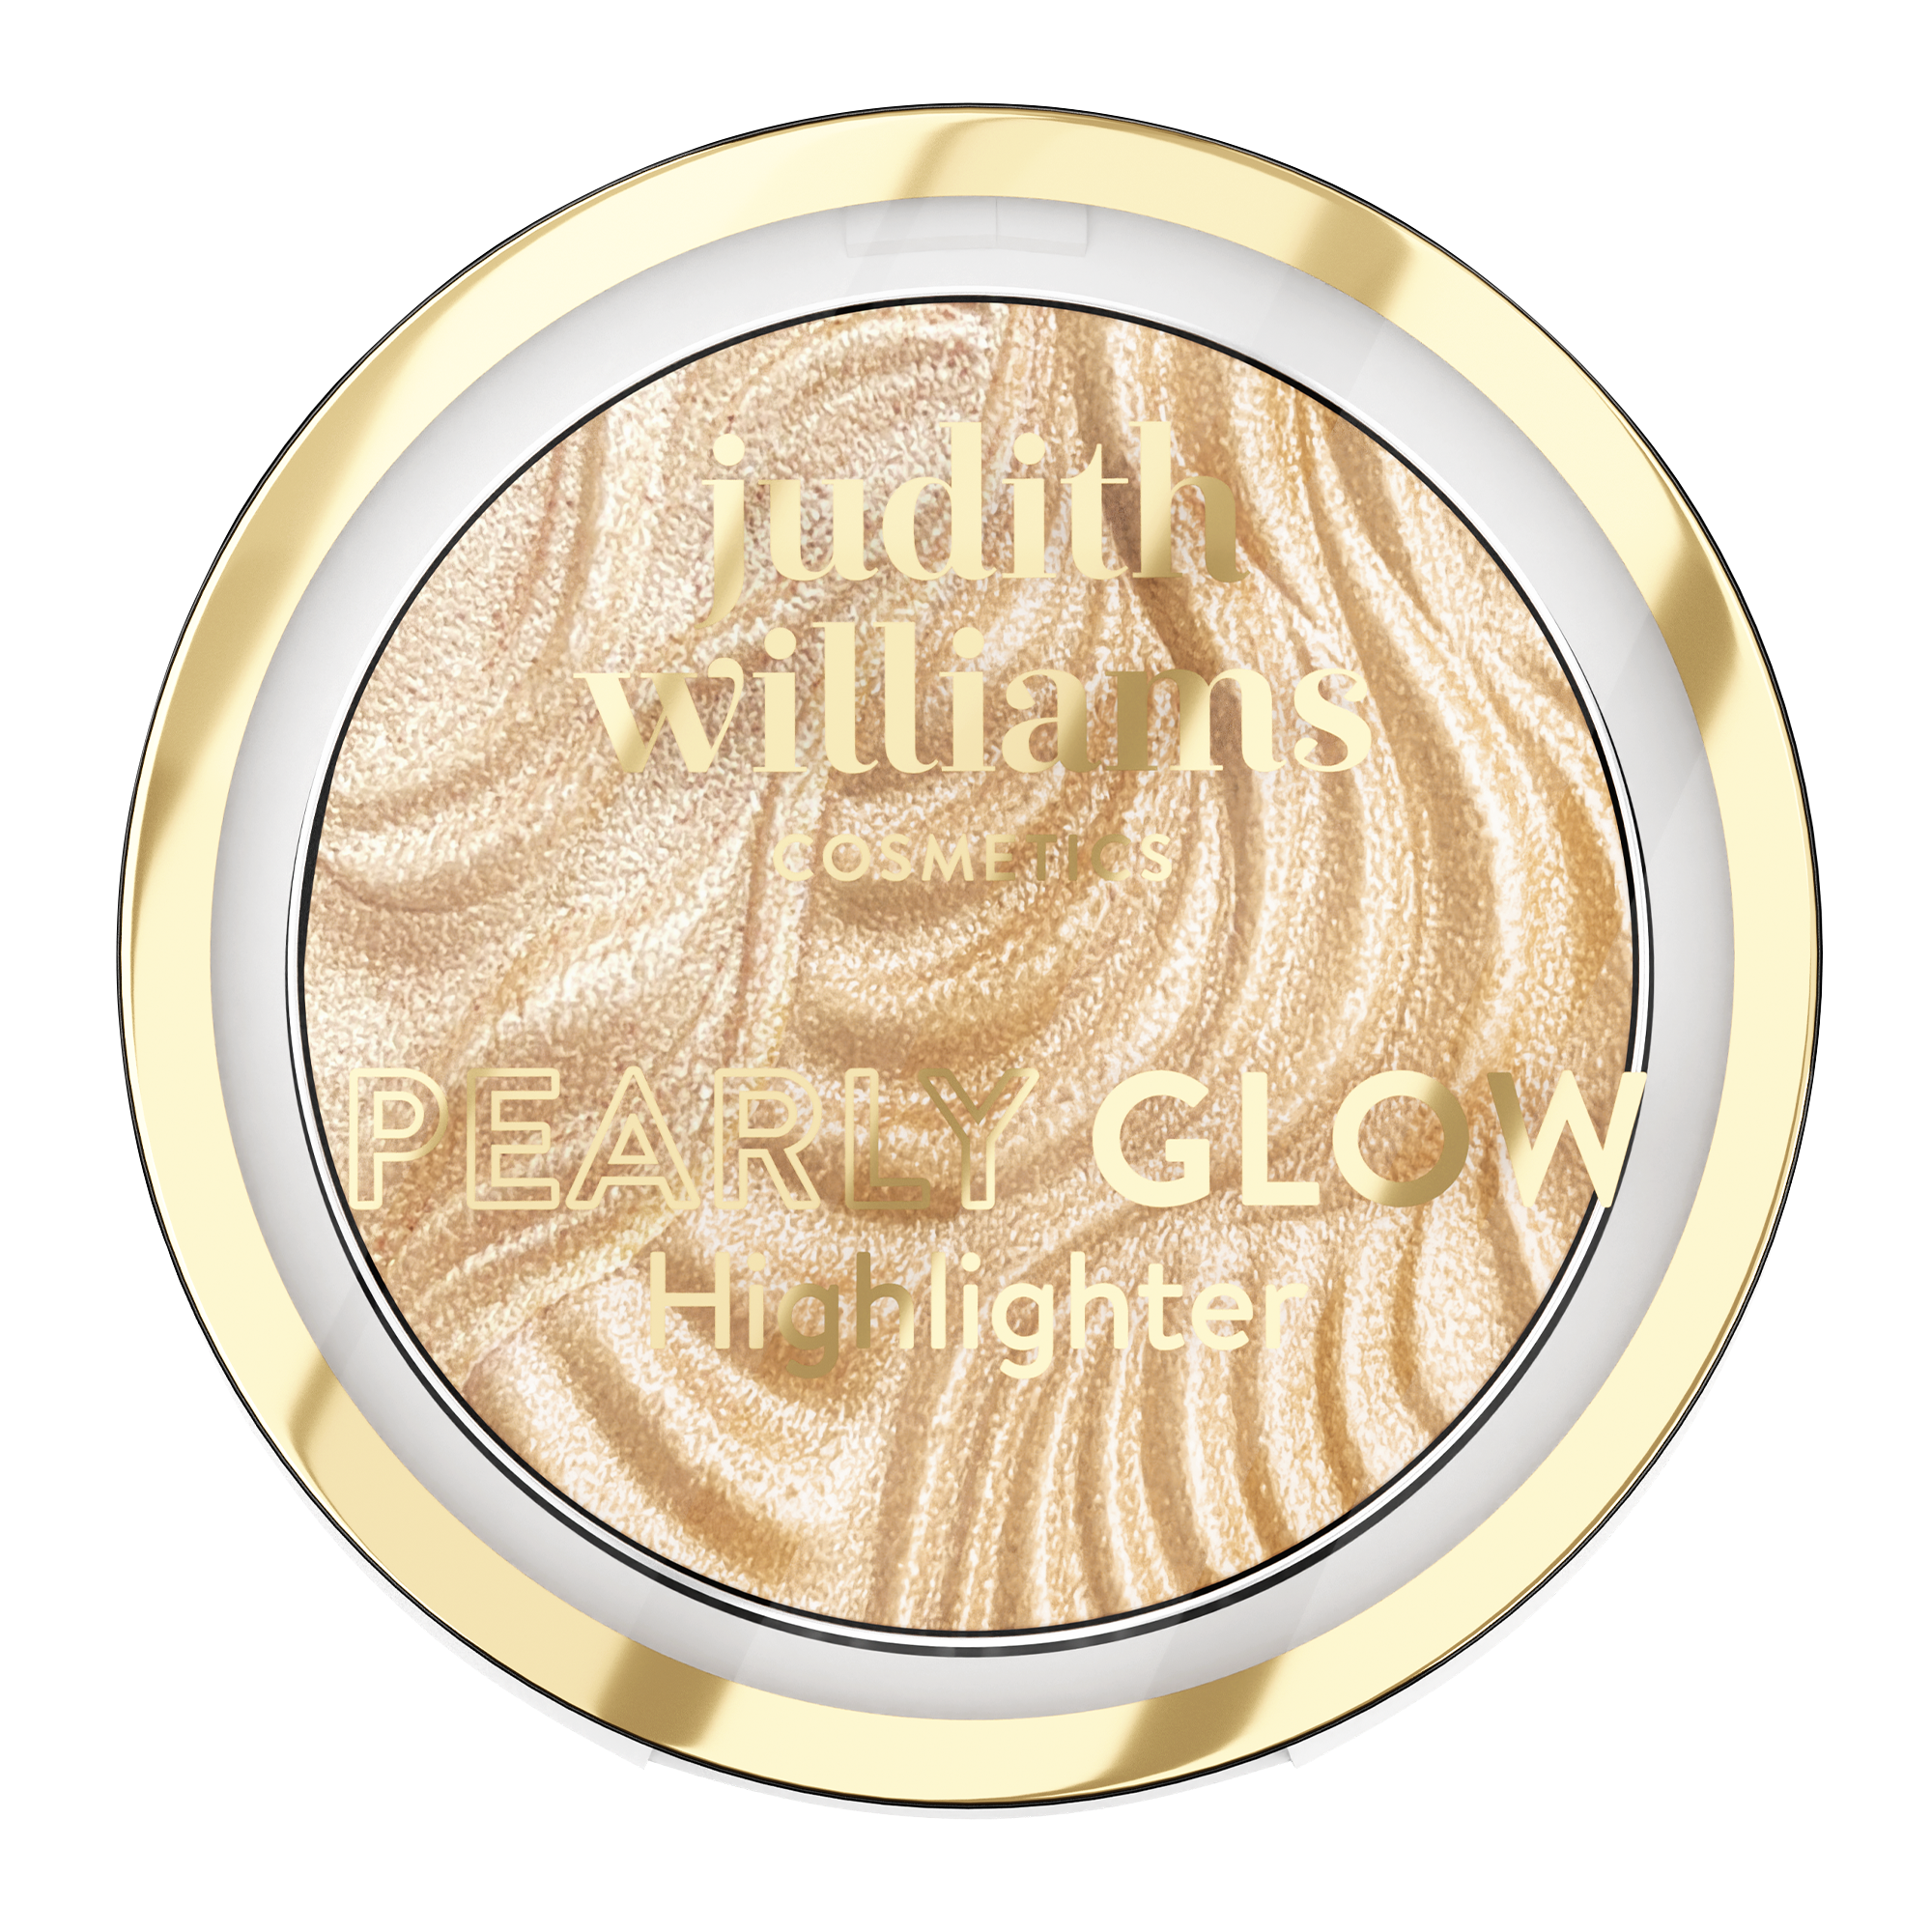 Highlighter | Make-up | Pearly Glow Highlighter | Judith Williams